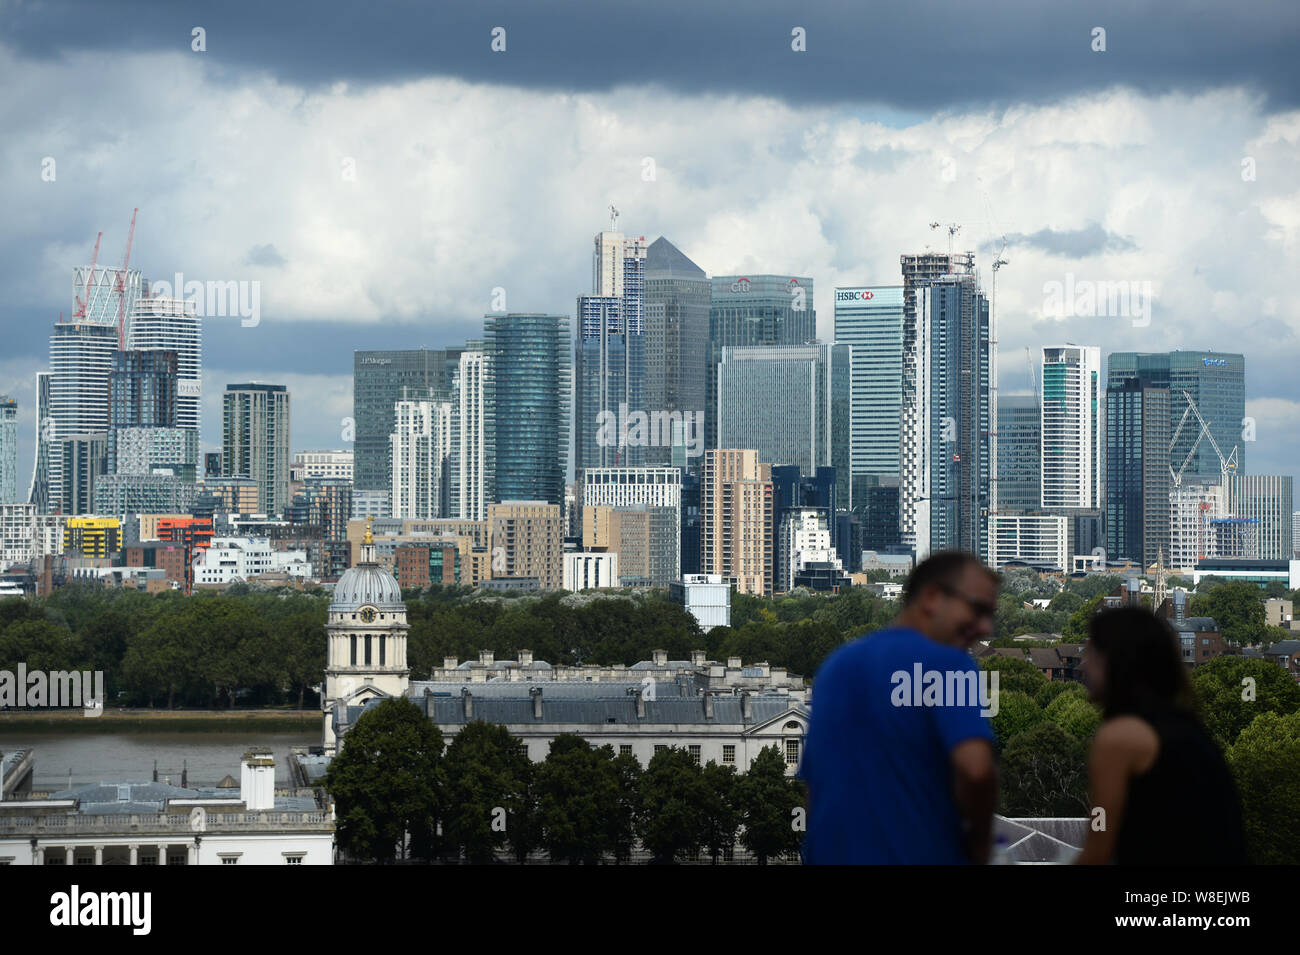 People observe the view of the Old Royal Naval College and Canary Wharf, from the Royal Observatory in Greenwich, London. Warnings for rain and wind came into force across nearly all of the UK today. Stock Photo